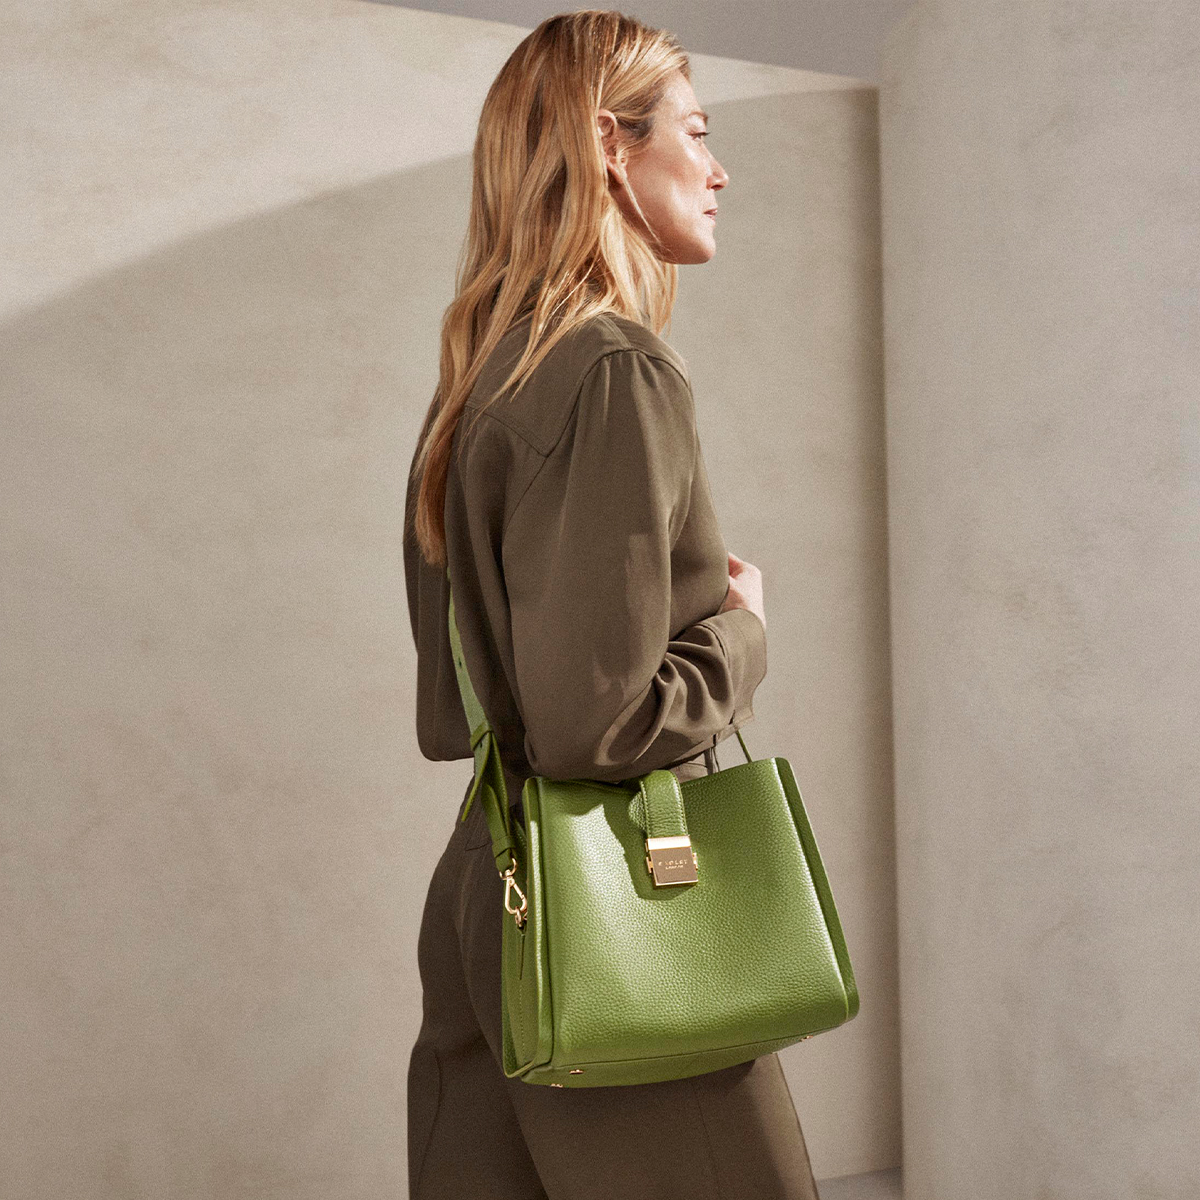 Radley Summer Styles in New Arrivals